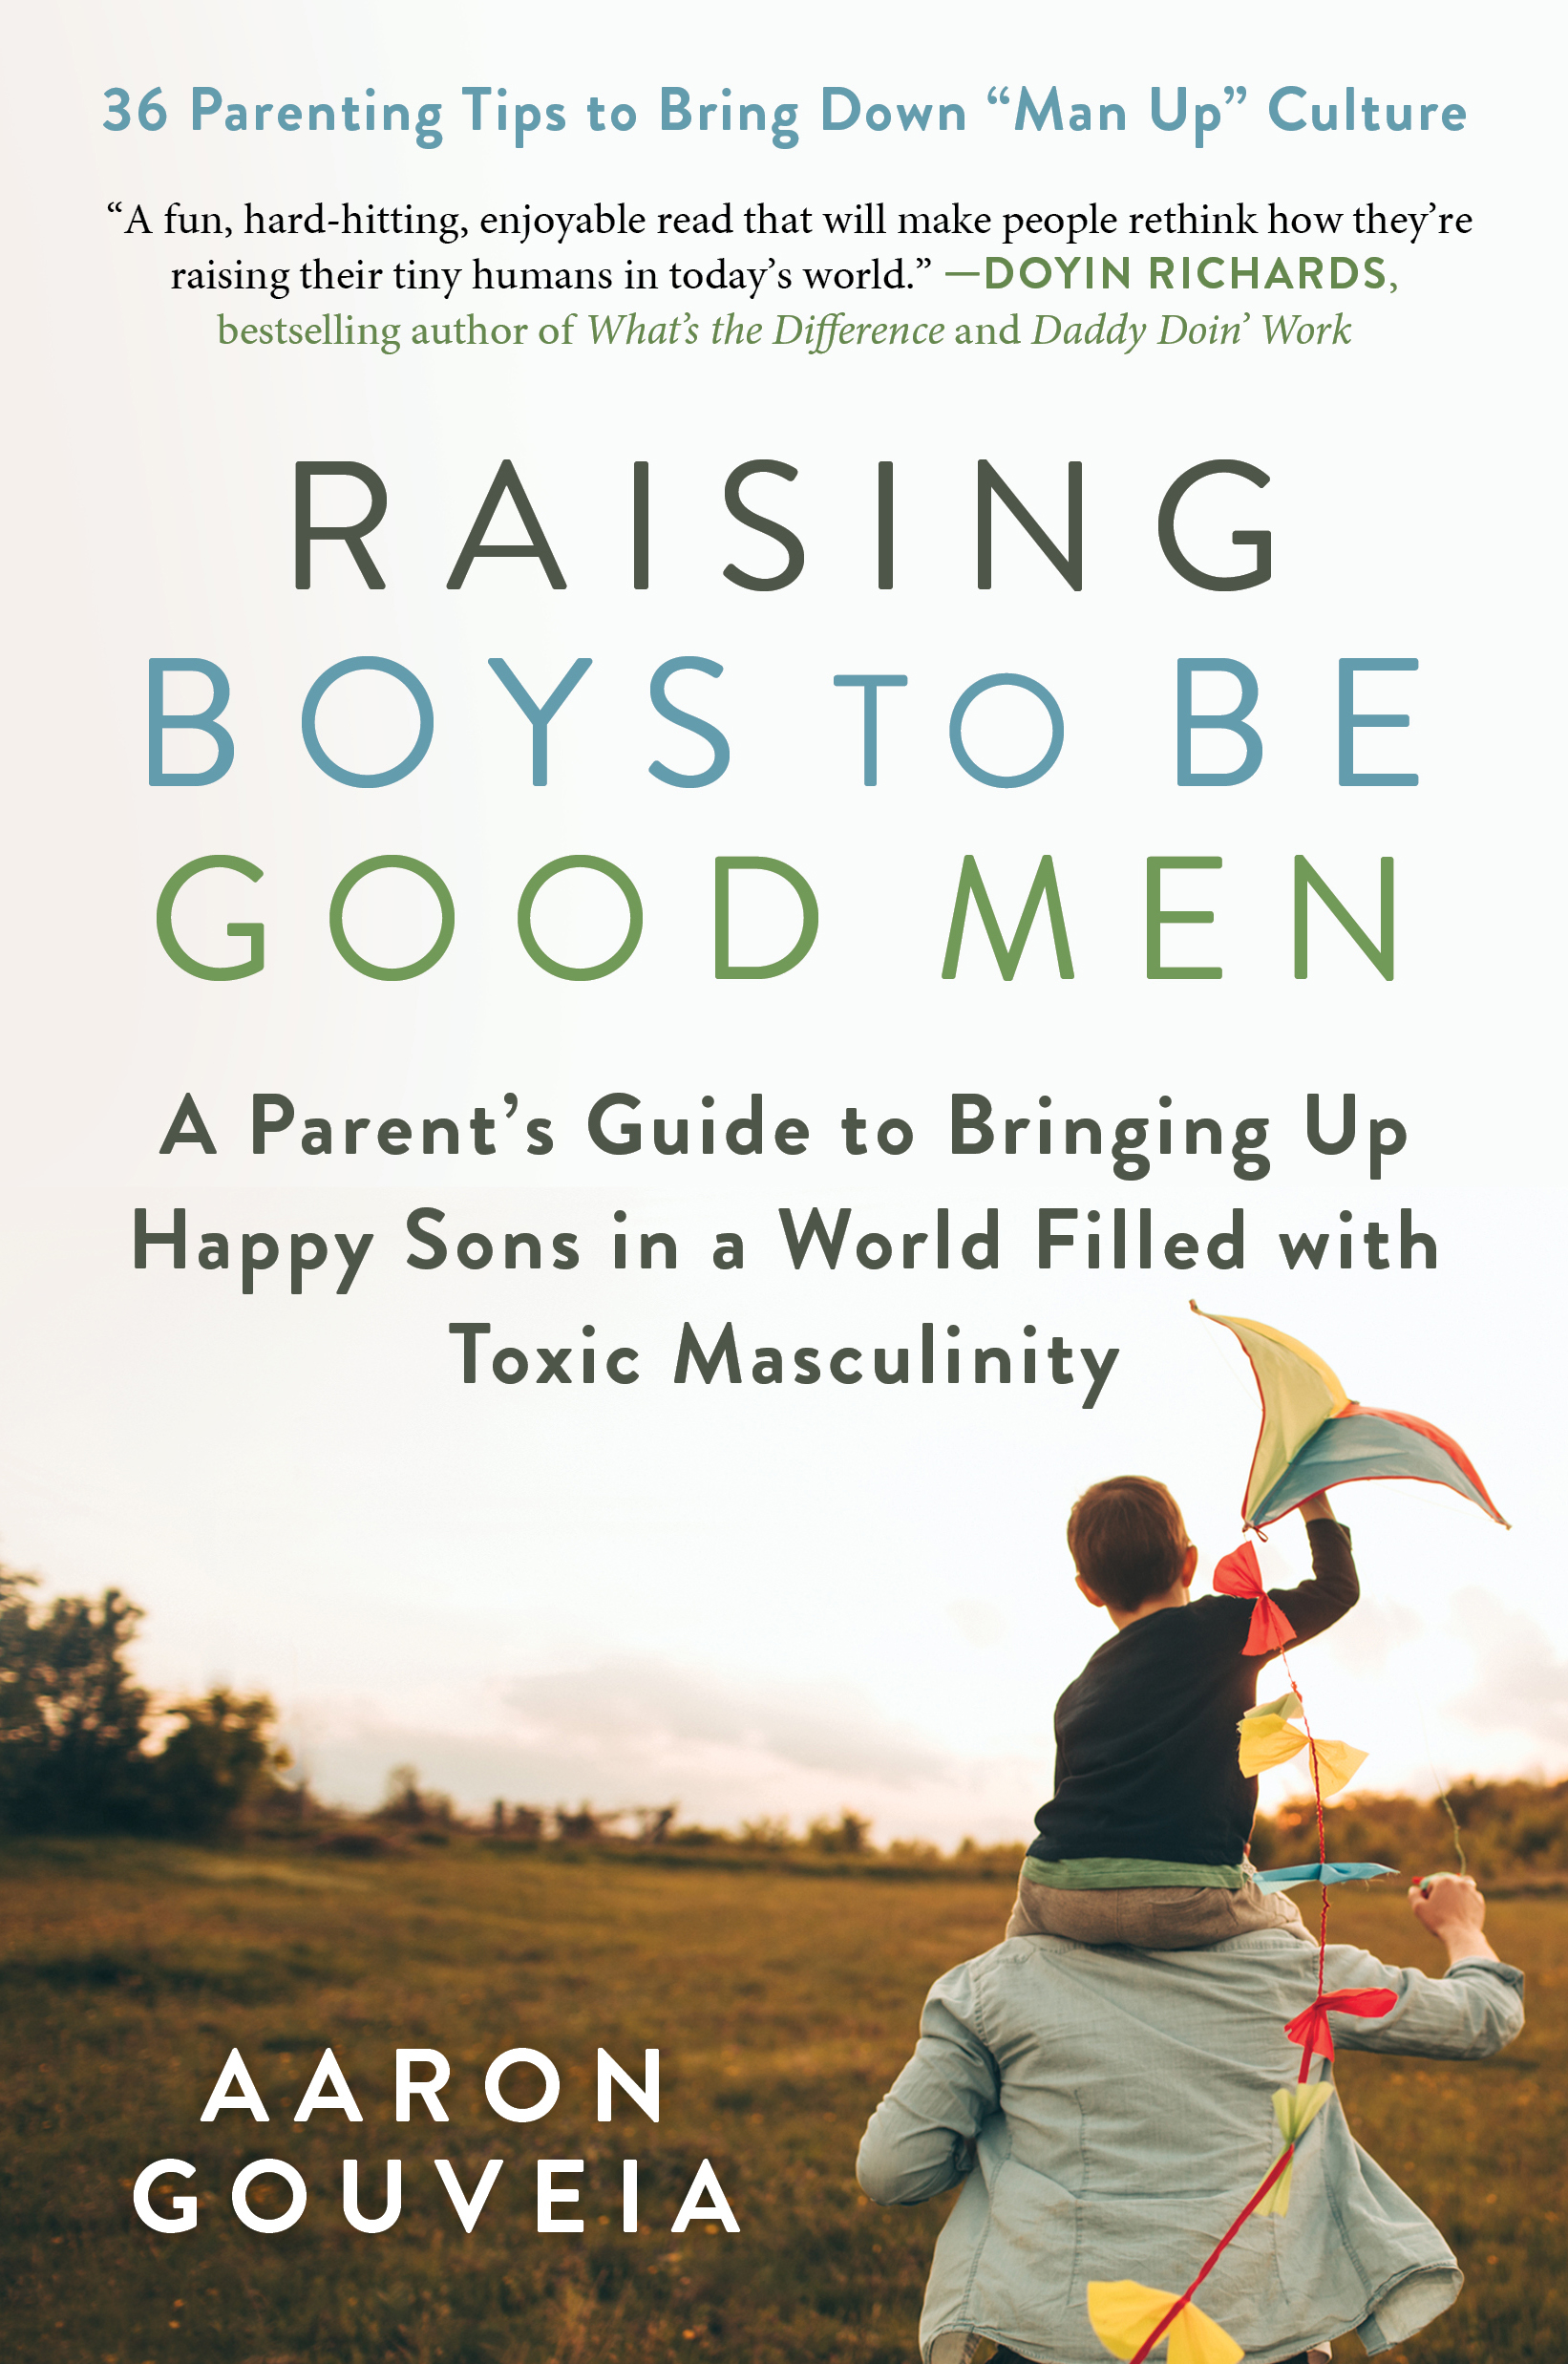 Raising Boys to be Good Men: A Parent's Guide to Bringing up Happy Sons in a World Filled with Toxic Masculinity